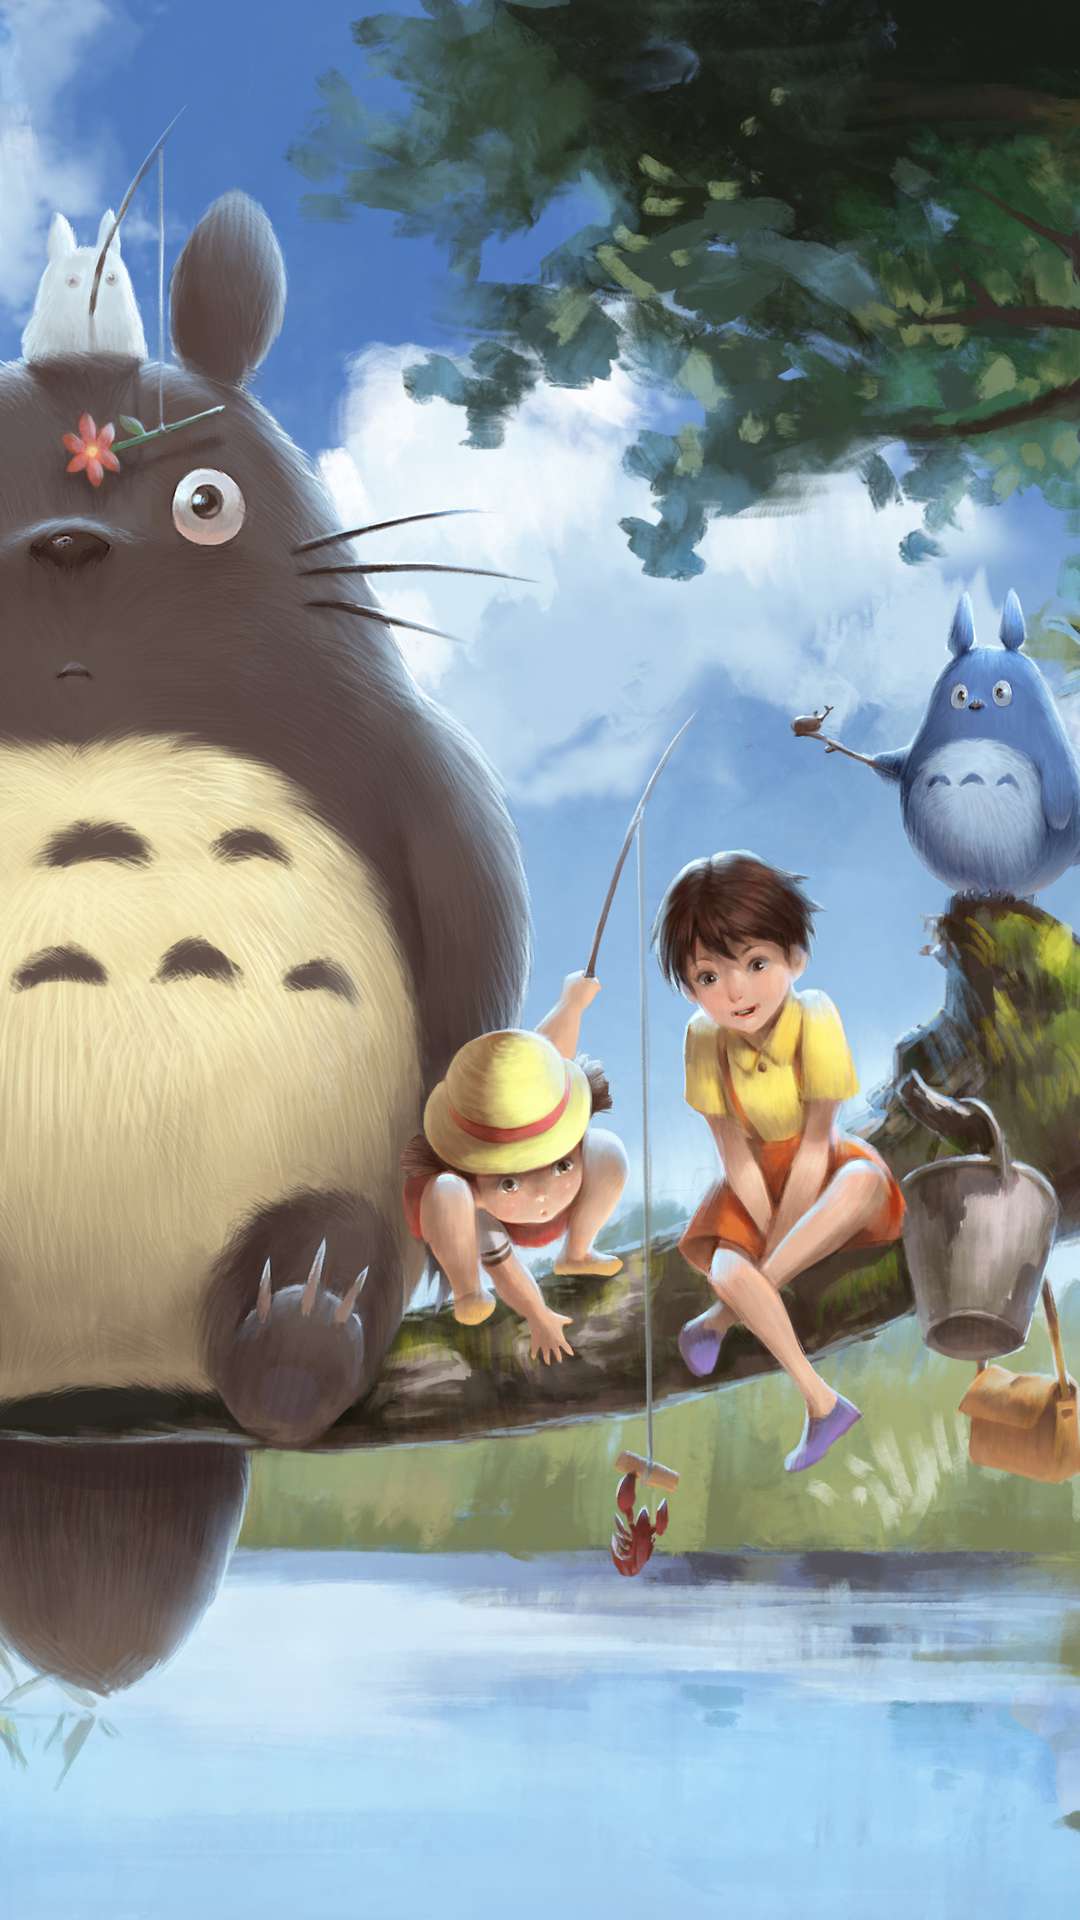 31 My Neighbor Totoro Wallpapers for iPhone and Android by Courtney  Martinez